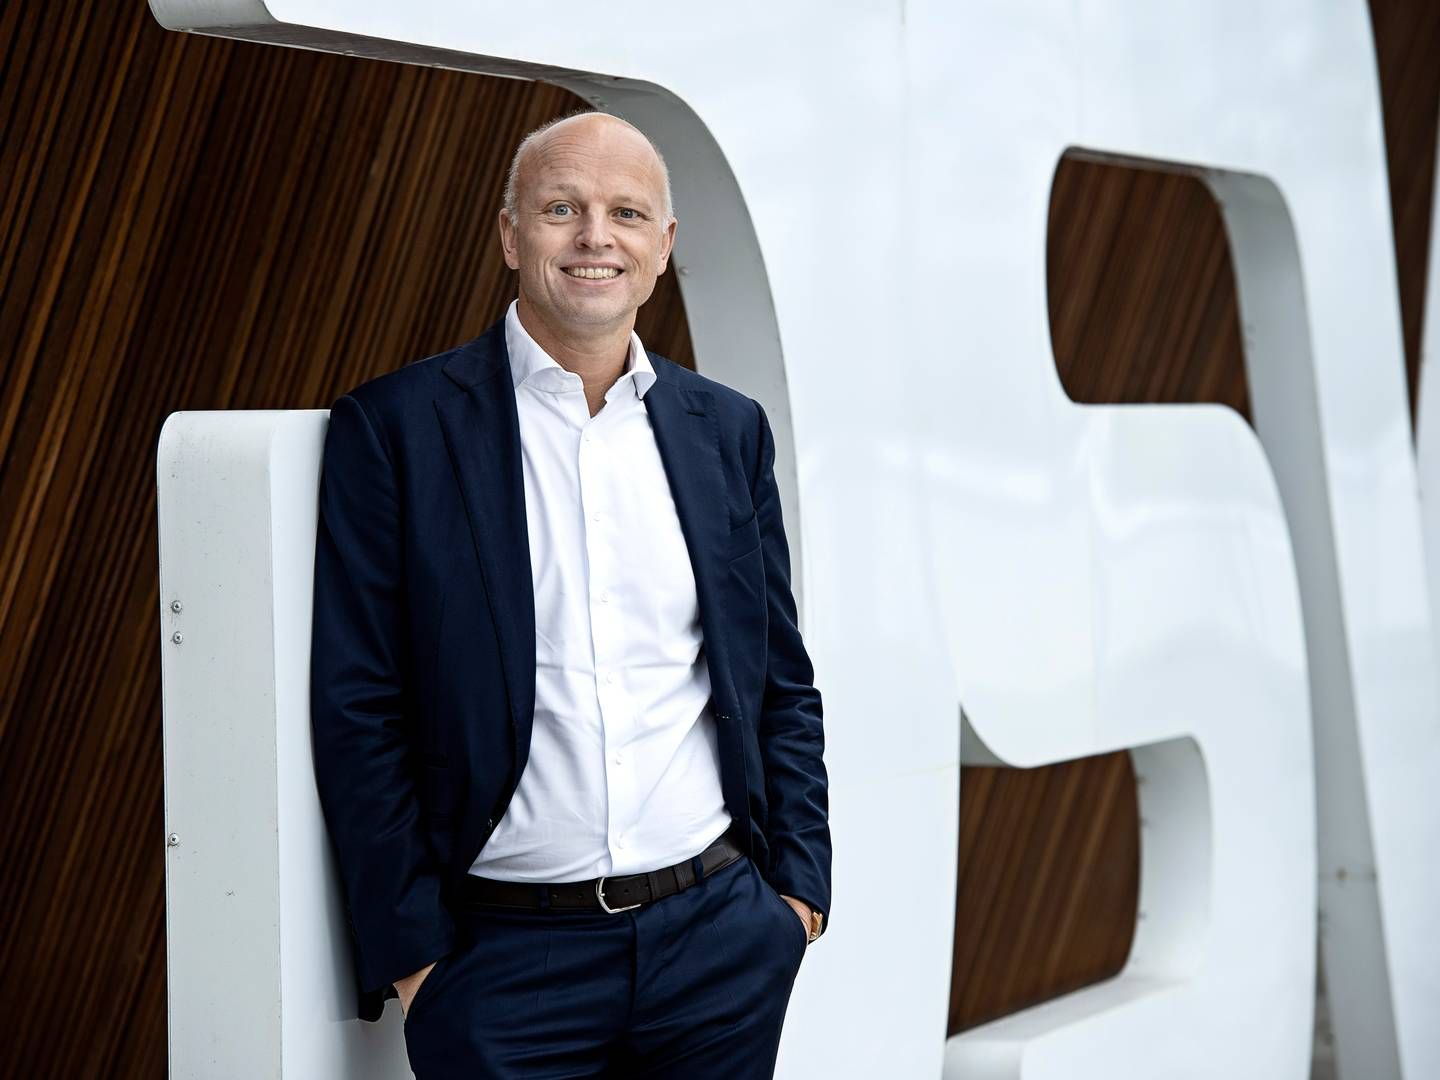 Jens Lund took over as CEO from Jens Bjørn Andersen last week. There is not a single woman on his new management team. | Photo: Pr / Dsv